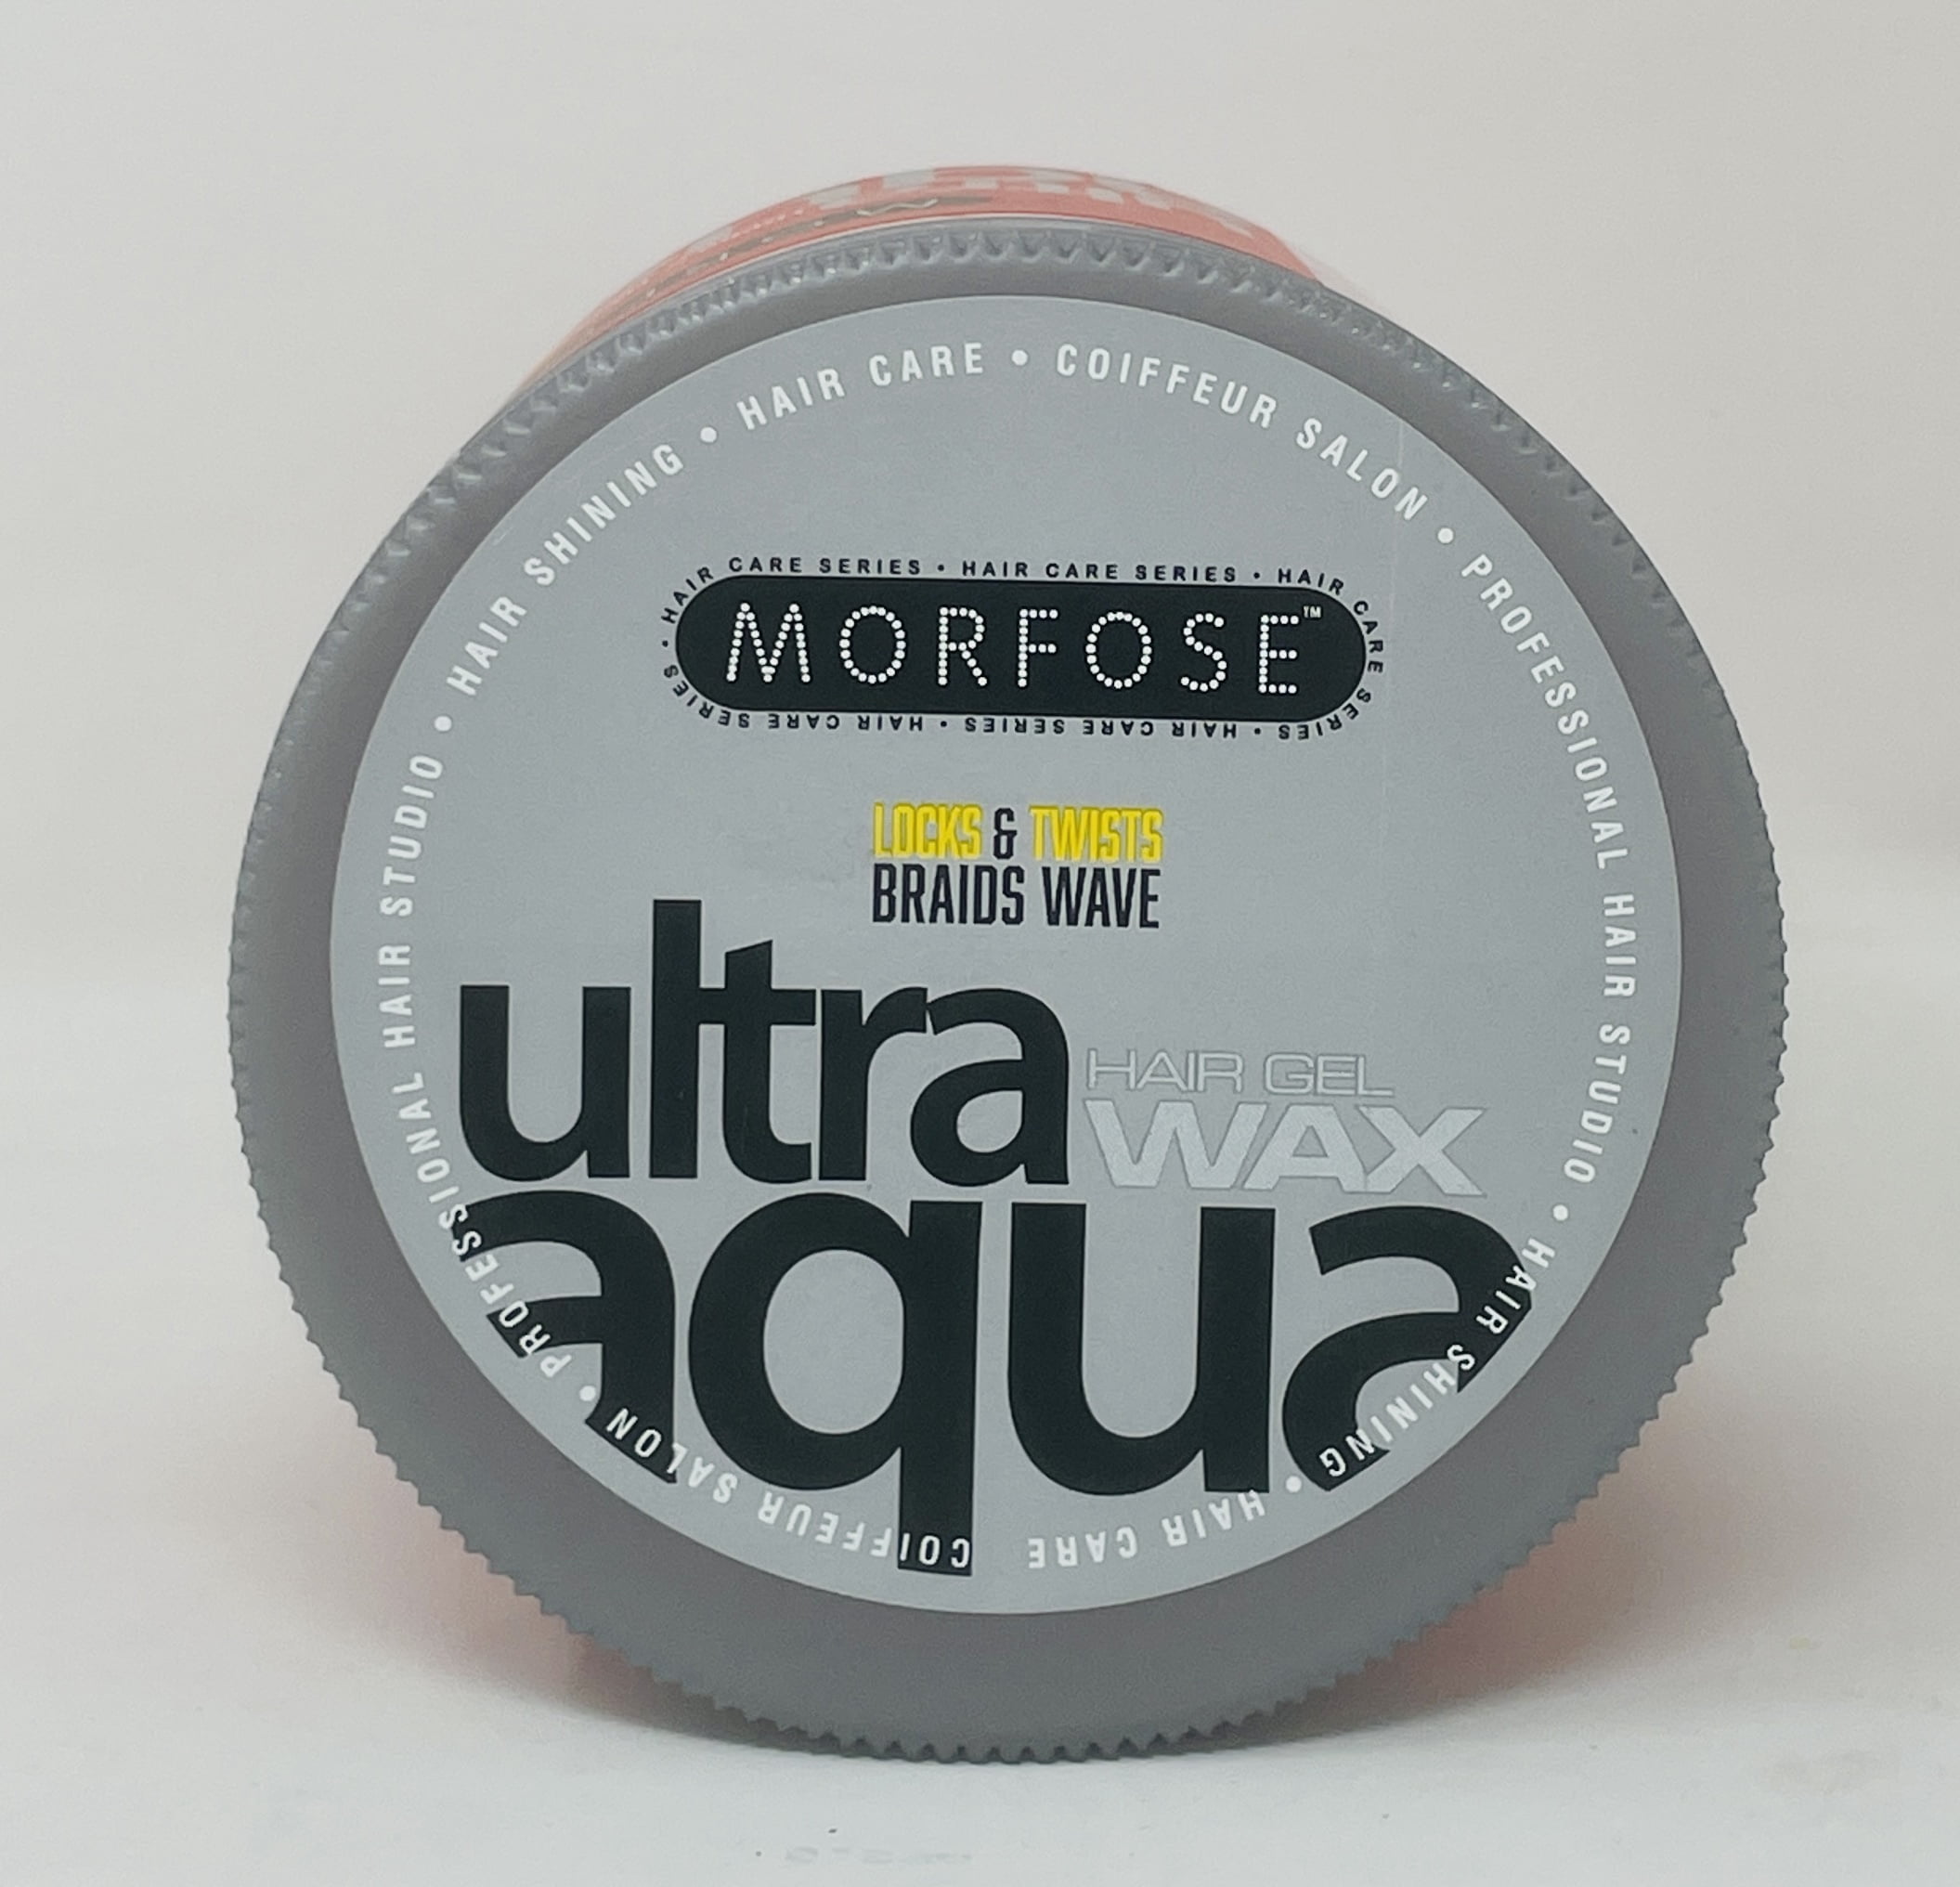  Morfose Deep Aqua Hair Gel Wax with Shiny and Strong Flexible 5  Hold, Manage Flyaways, Braids, and Curls, Professional Hair Styling for  Women and Men, Fruity Scent, 5.92 fl. oz., (deep